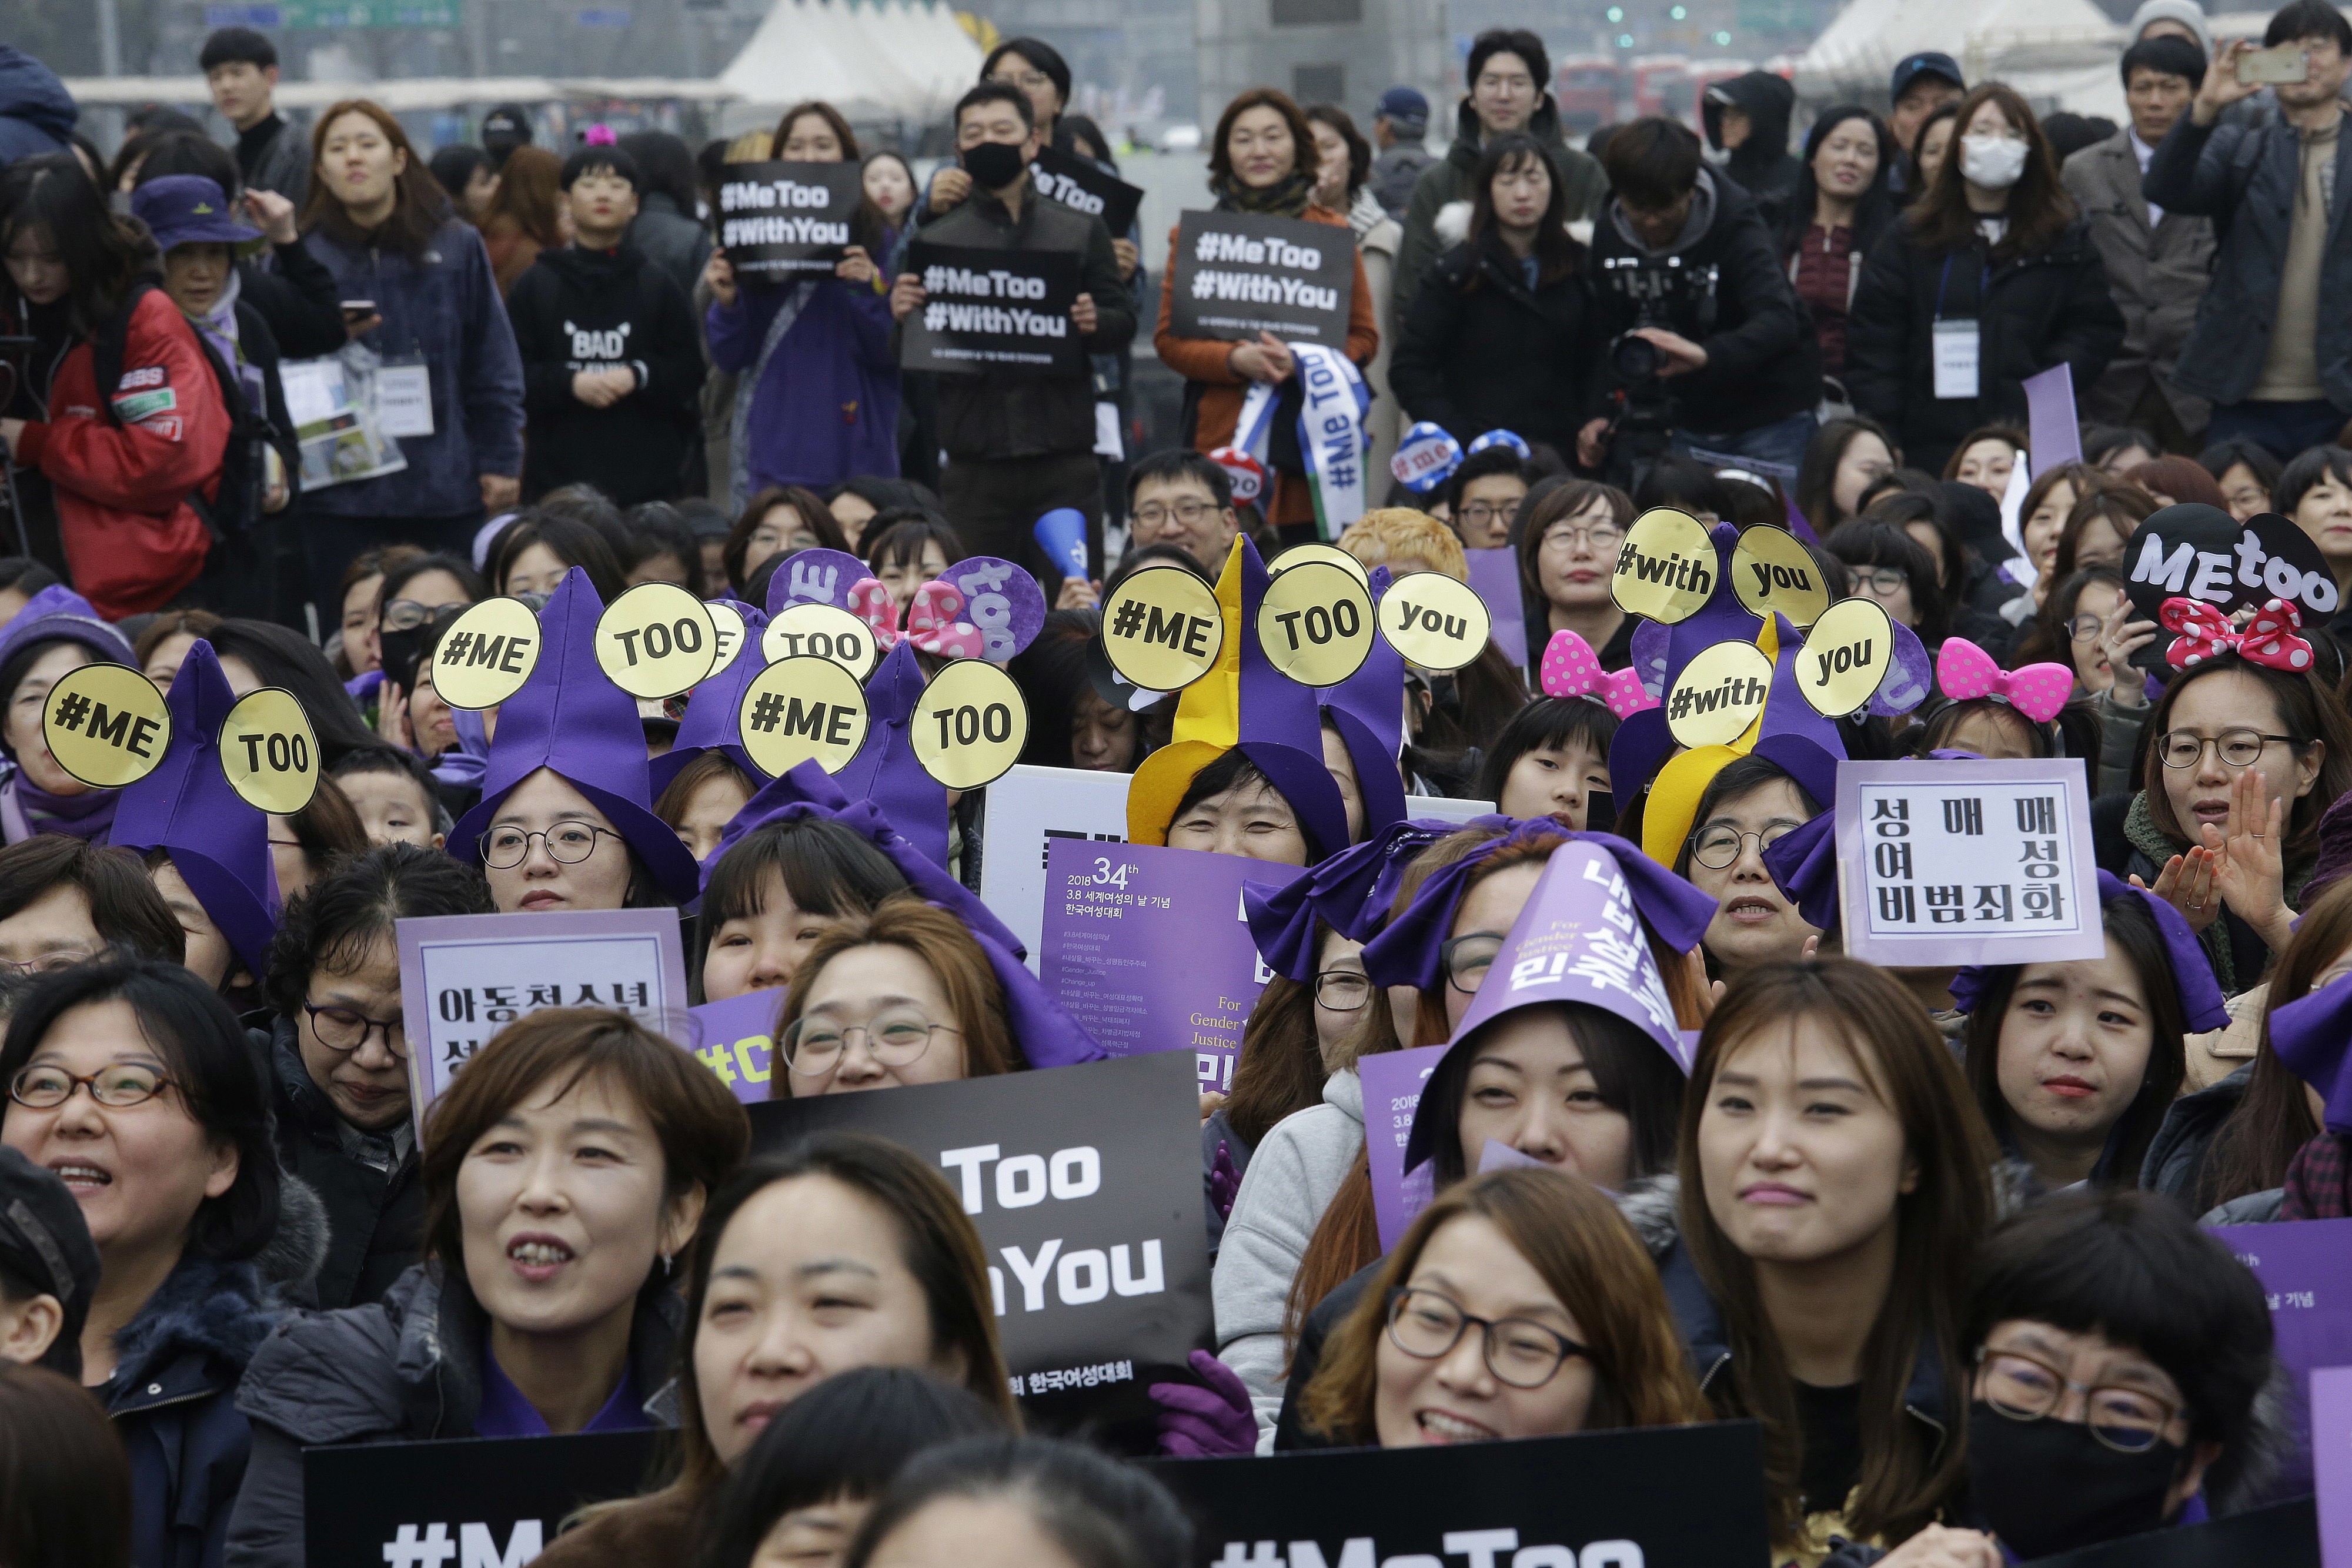 In South Korea, the campaign against sexual harassment has taken down a presidential hopeful and a freedom fighter turned poet who once had hopes of a Nobel Prize. In a notoriously patriarchal society, where will it end?